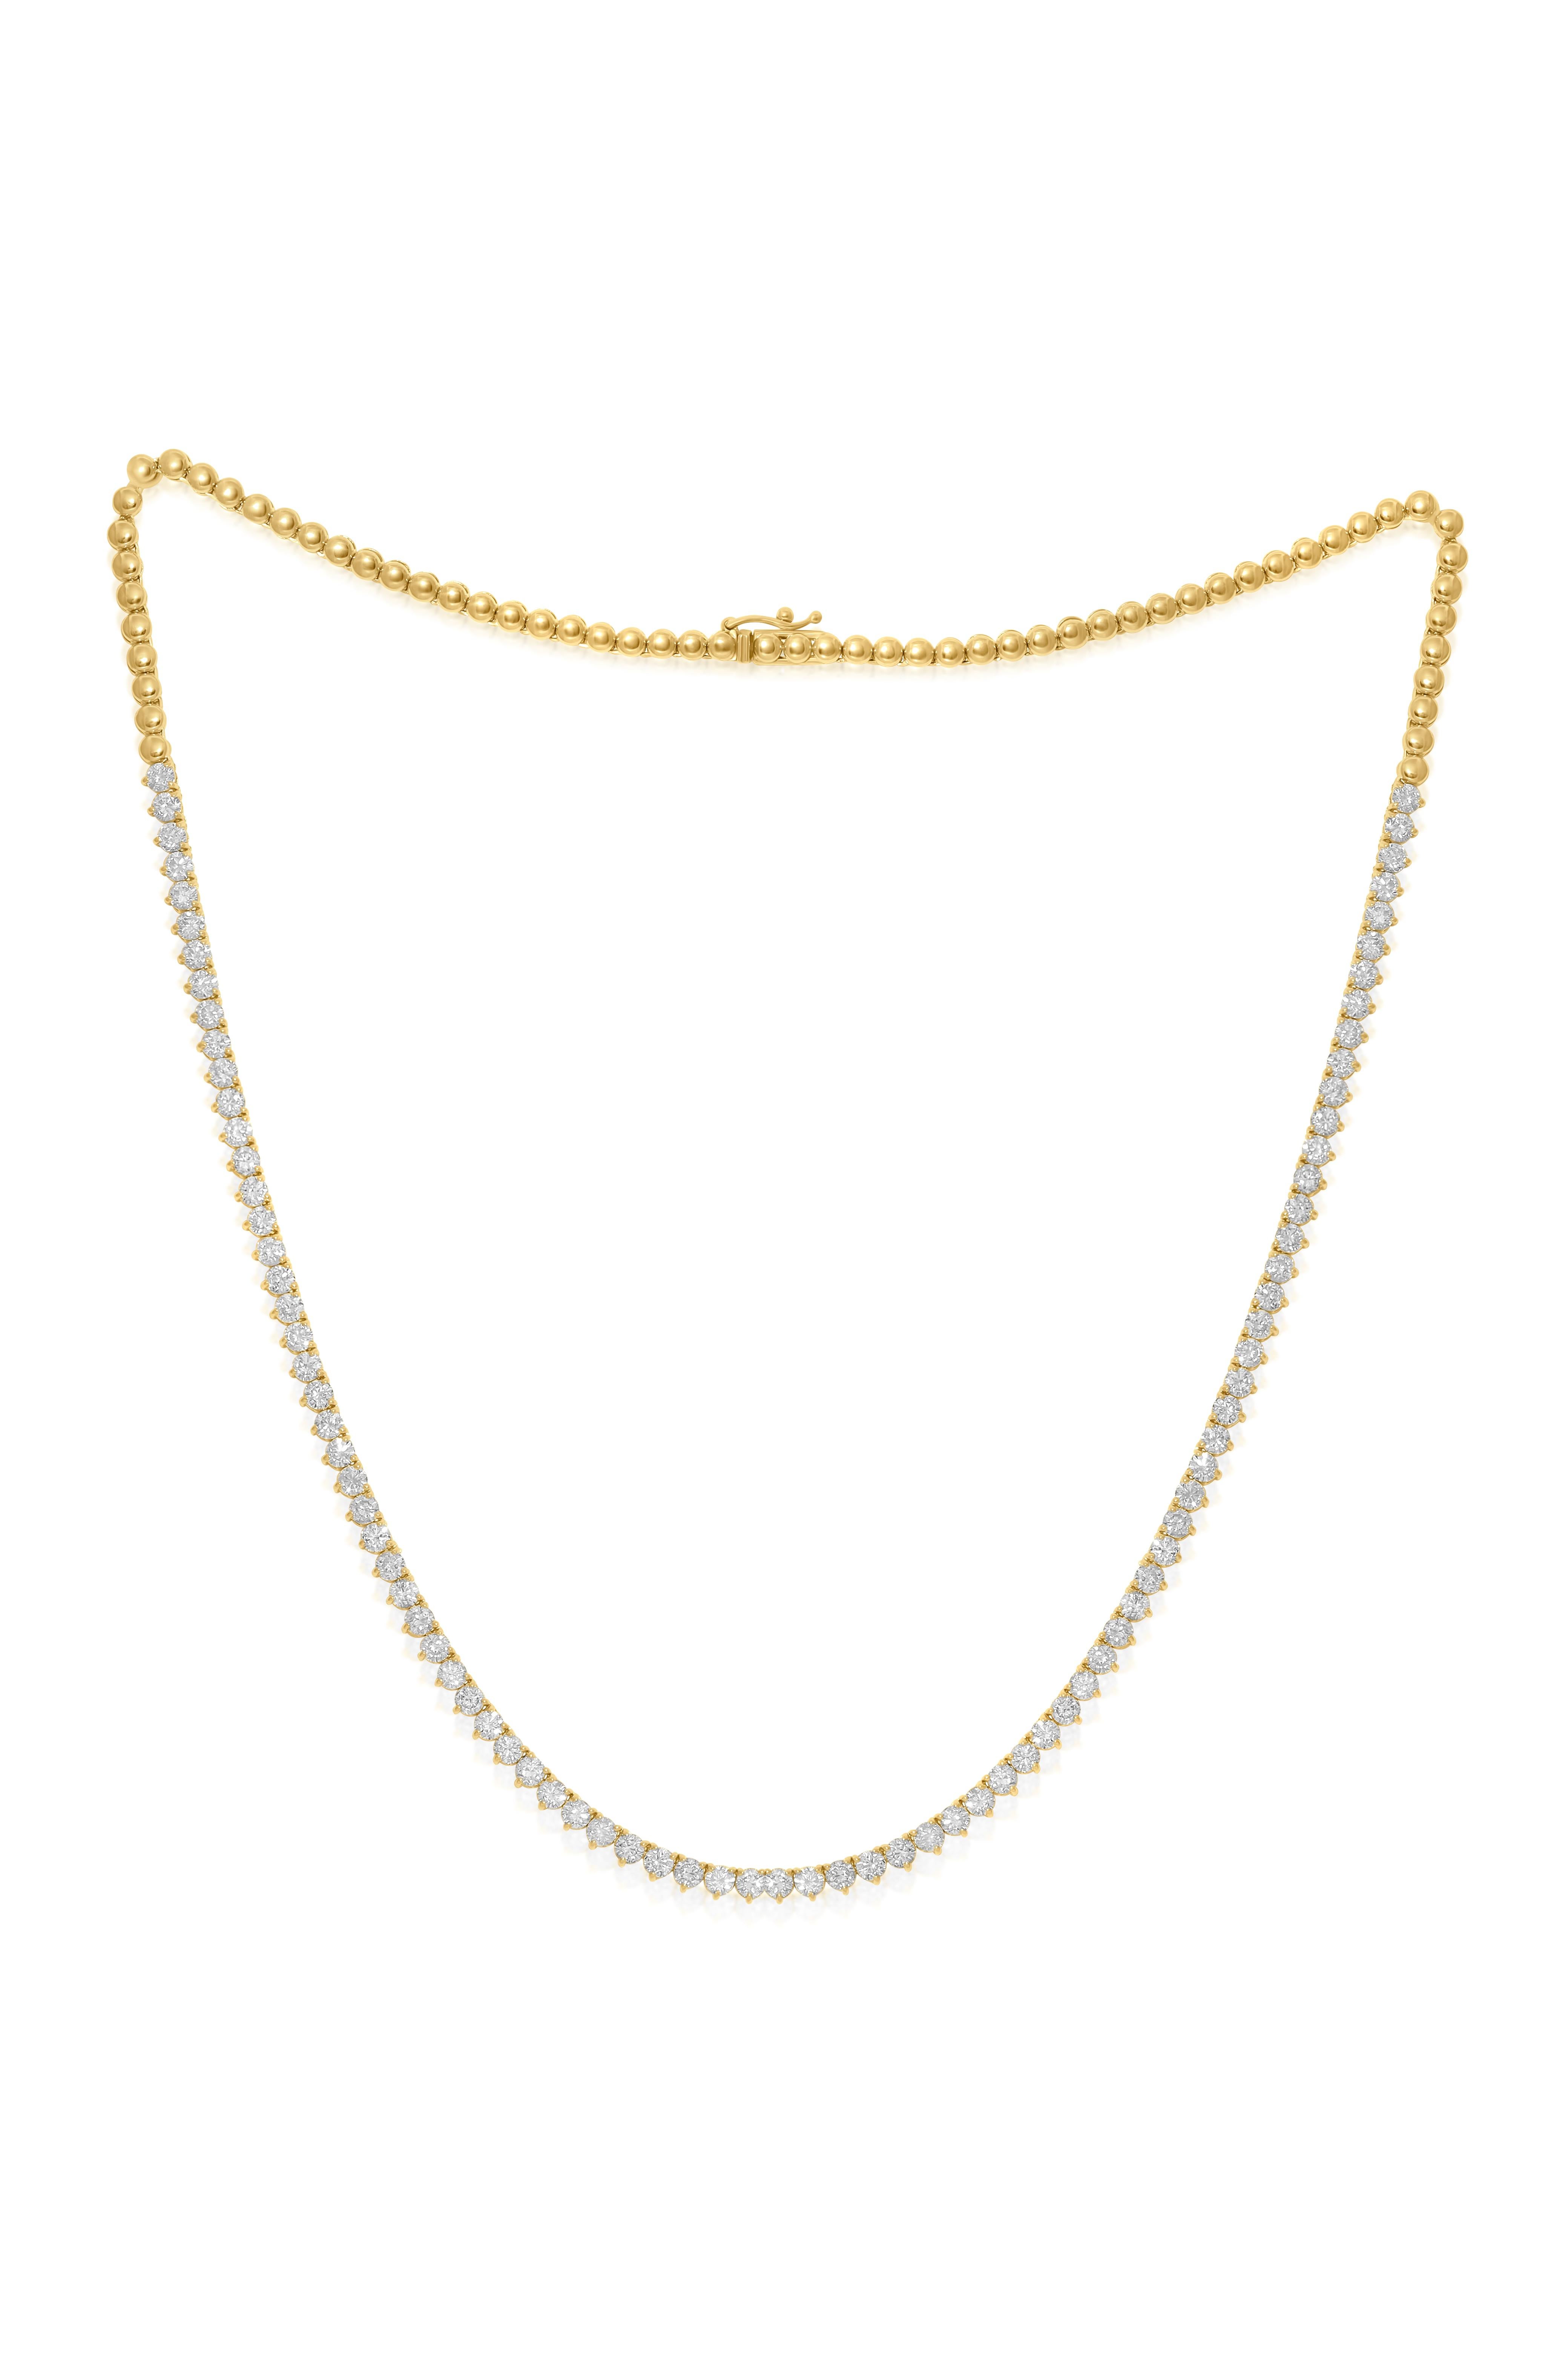 14K Yellow Gold Half Way Diamond Tennis necklace, features 7.00 carats of diamonds, set in yellow gold 3 prong mounting with 88 stones 
G-H in Color SI in Clarity 
